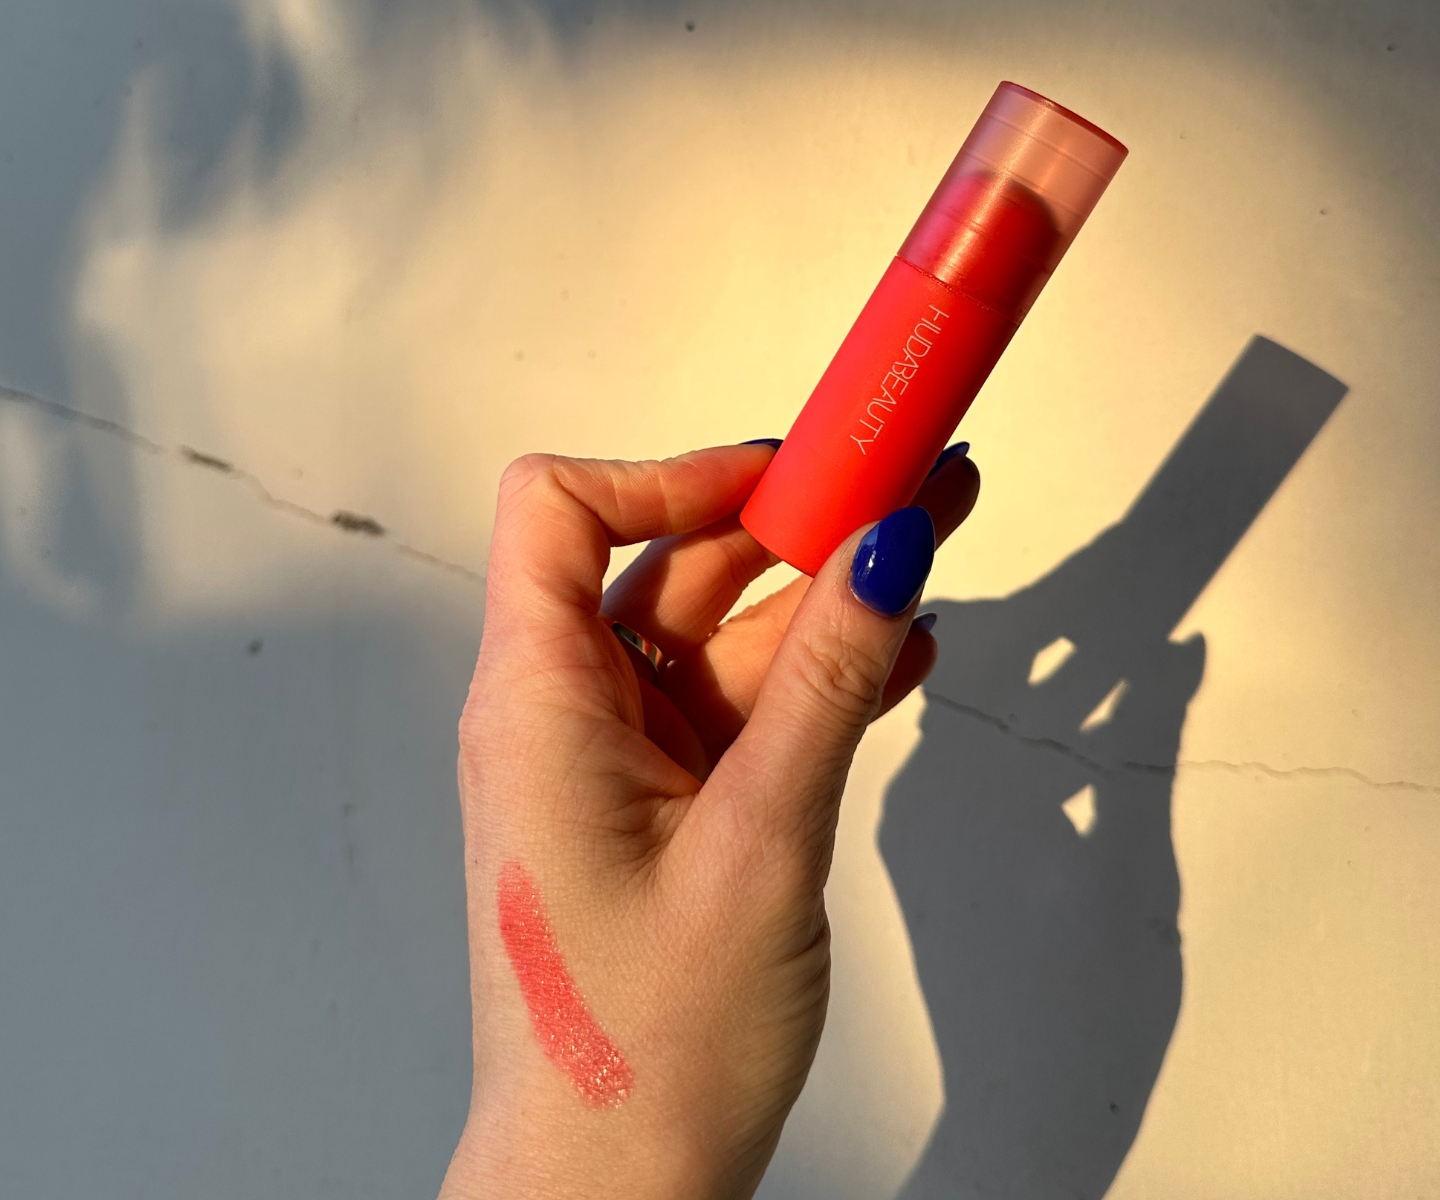 Huda Beauty Cheeky Tint Blush Stick in-article pic